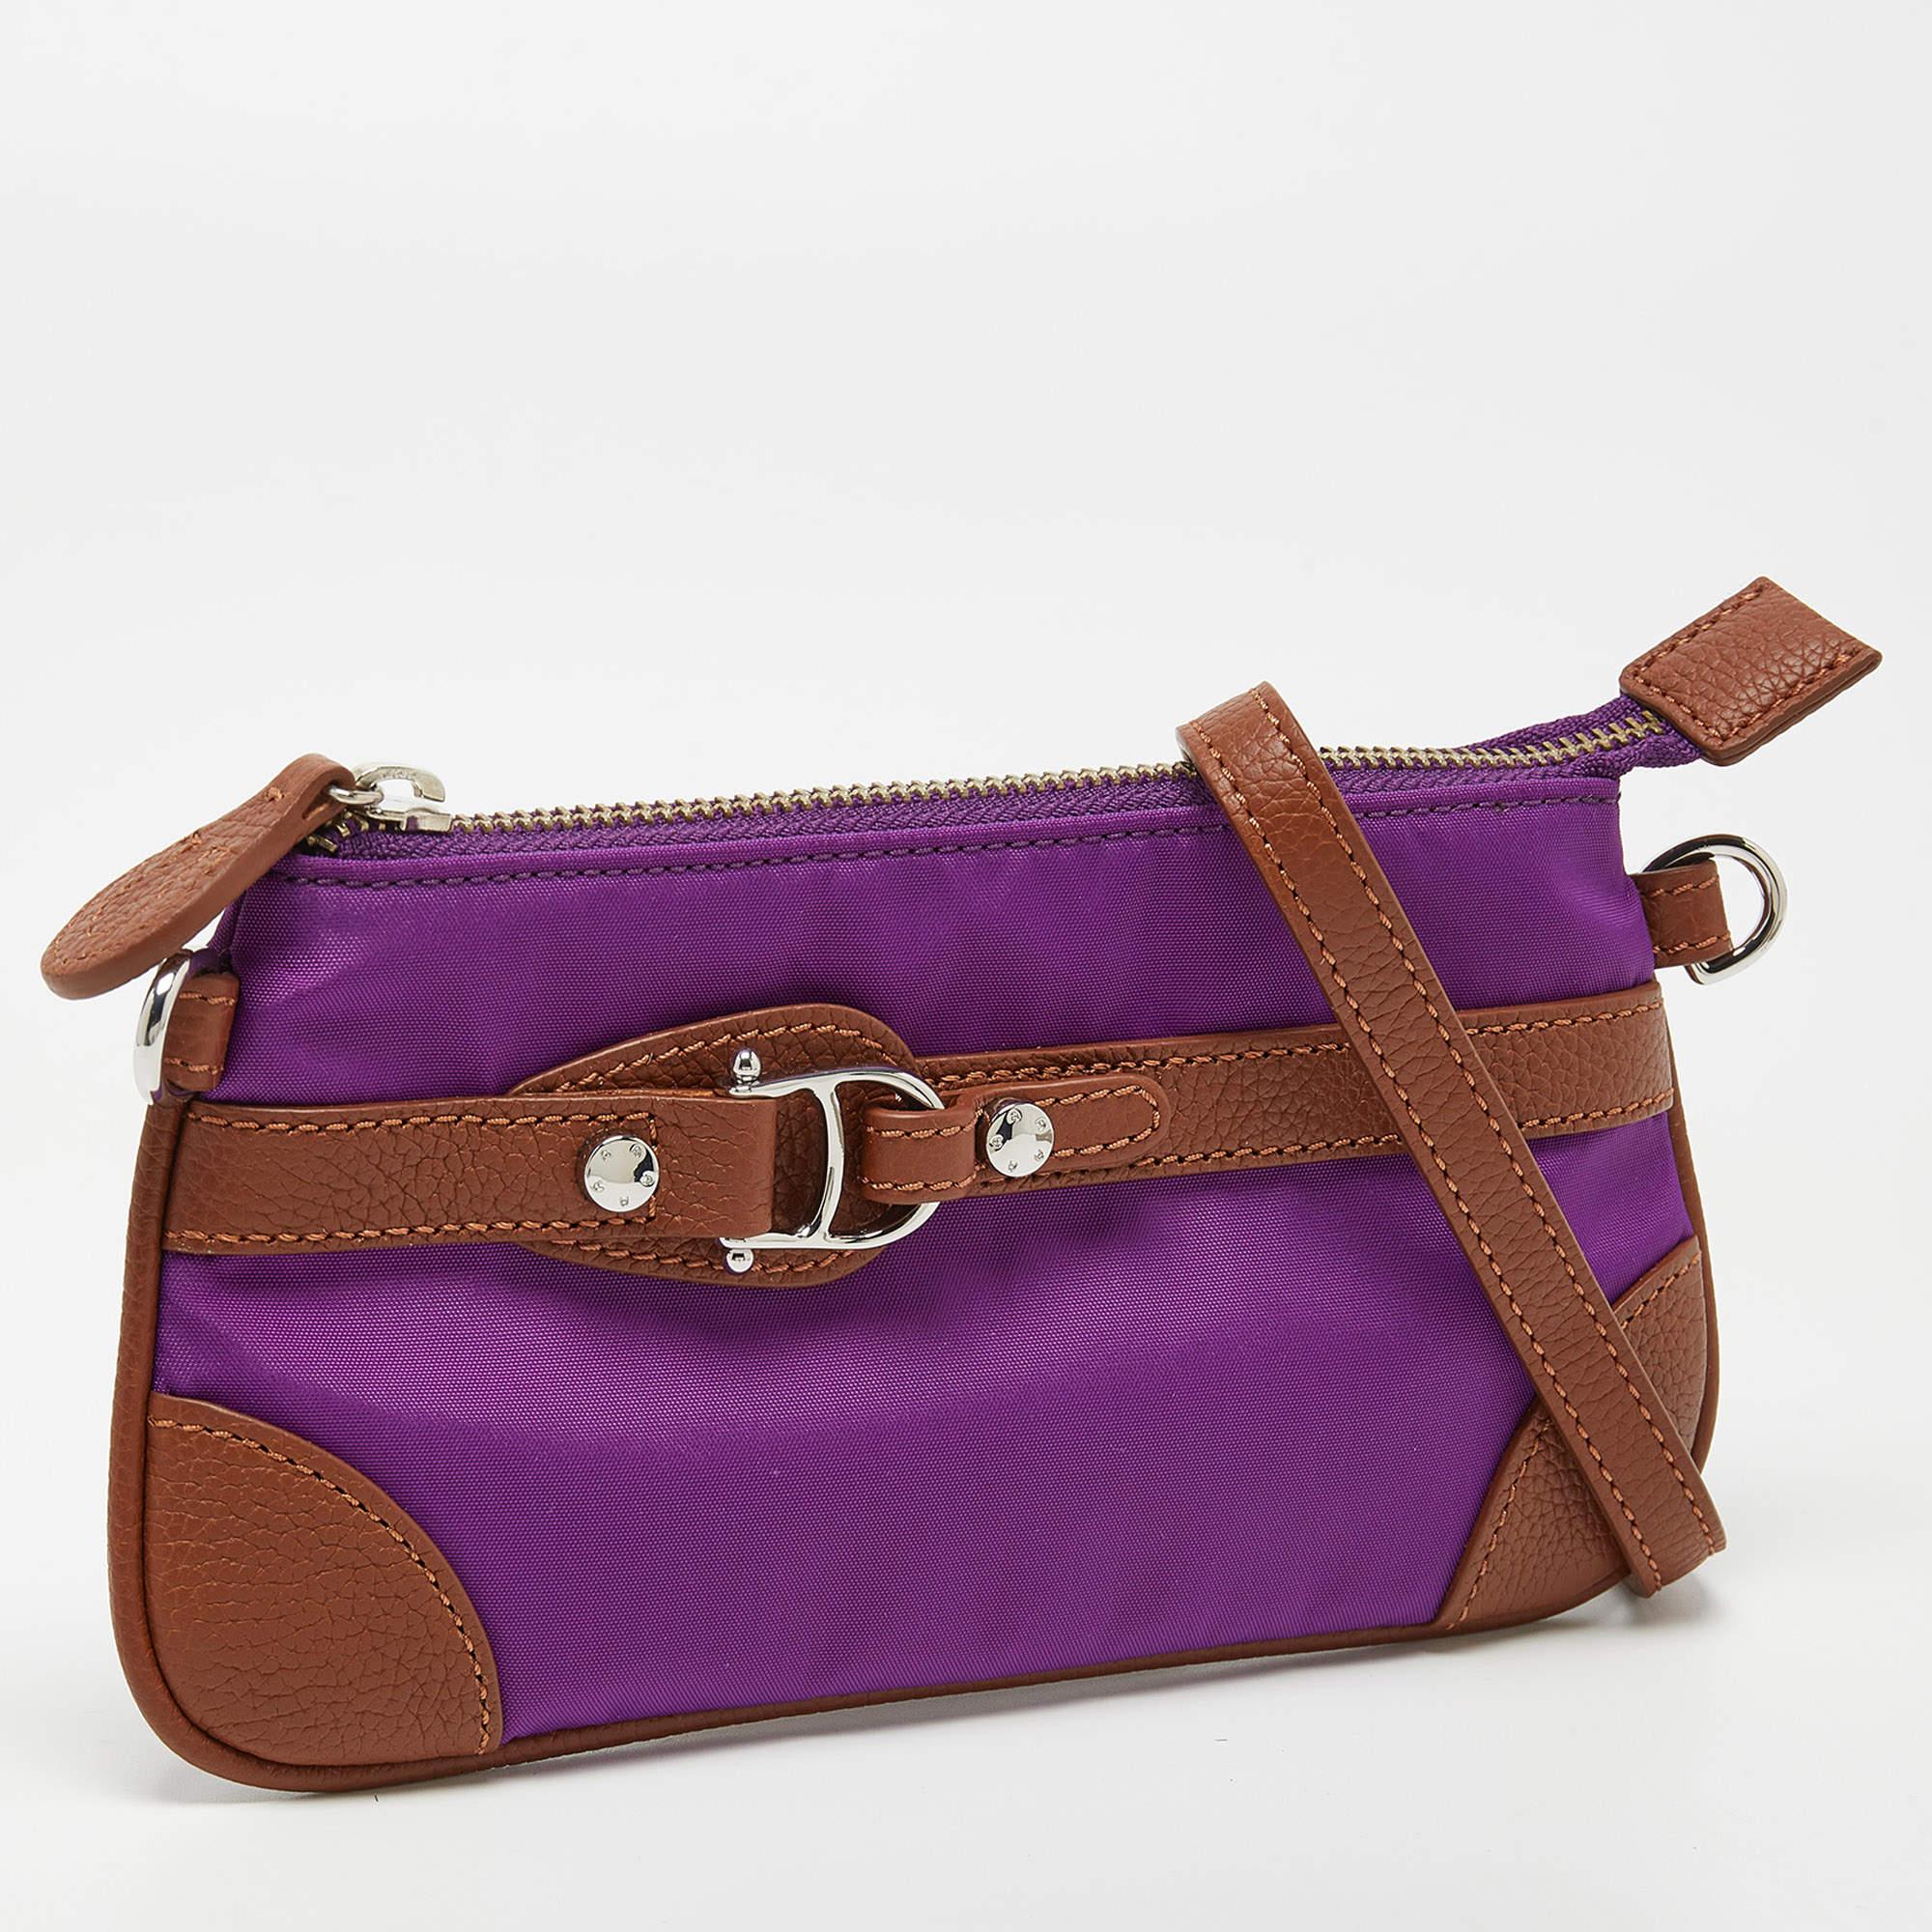 Aigner Purple/Brown Nylon and Leather Buckle Clutch Bag For Sale 5